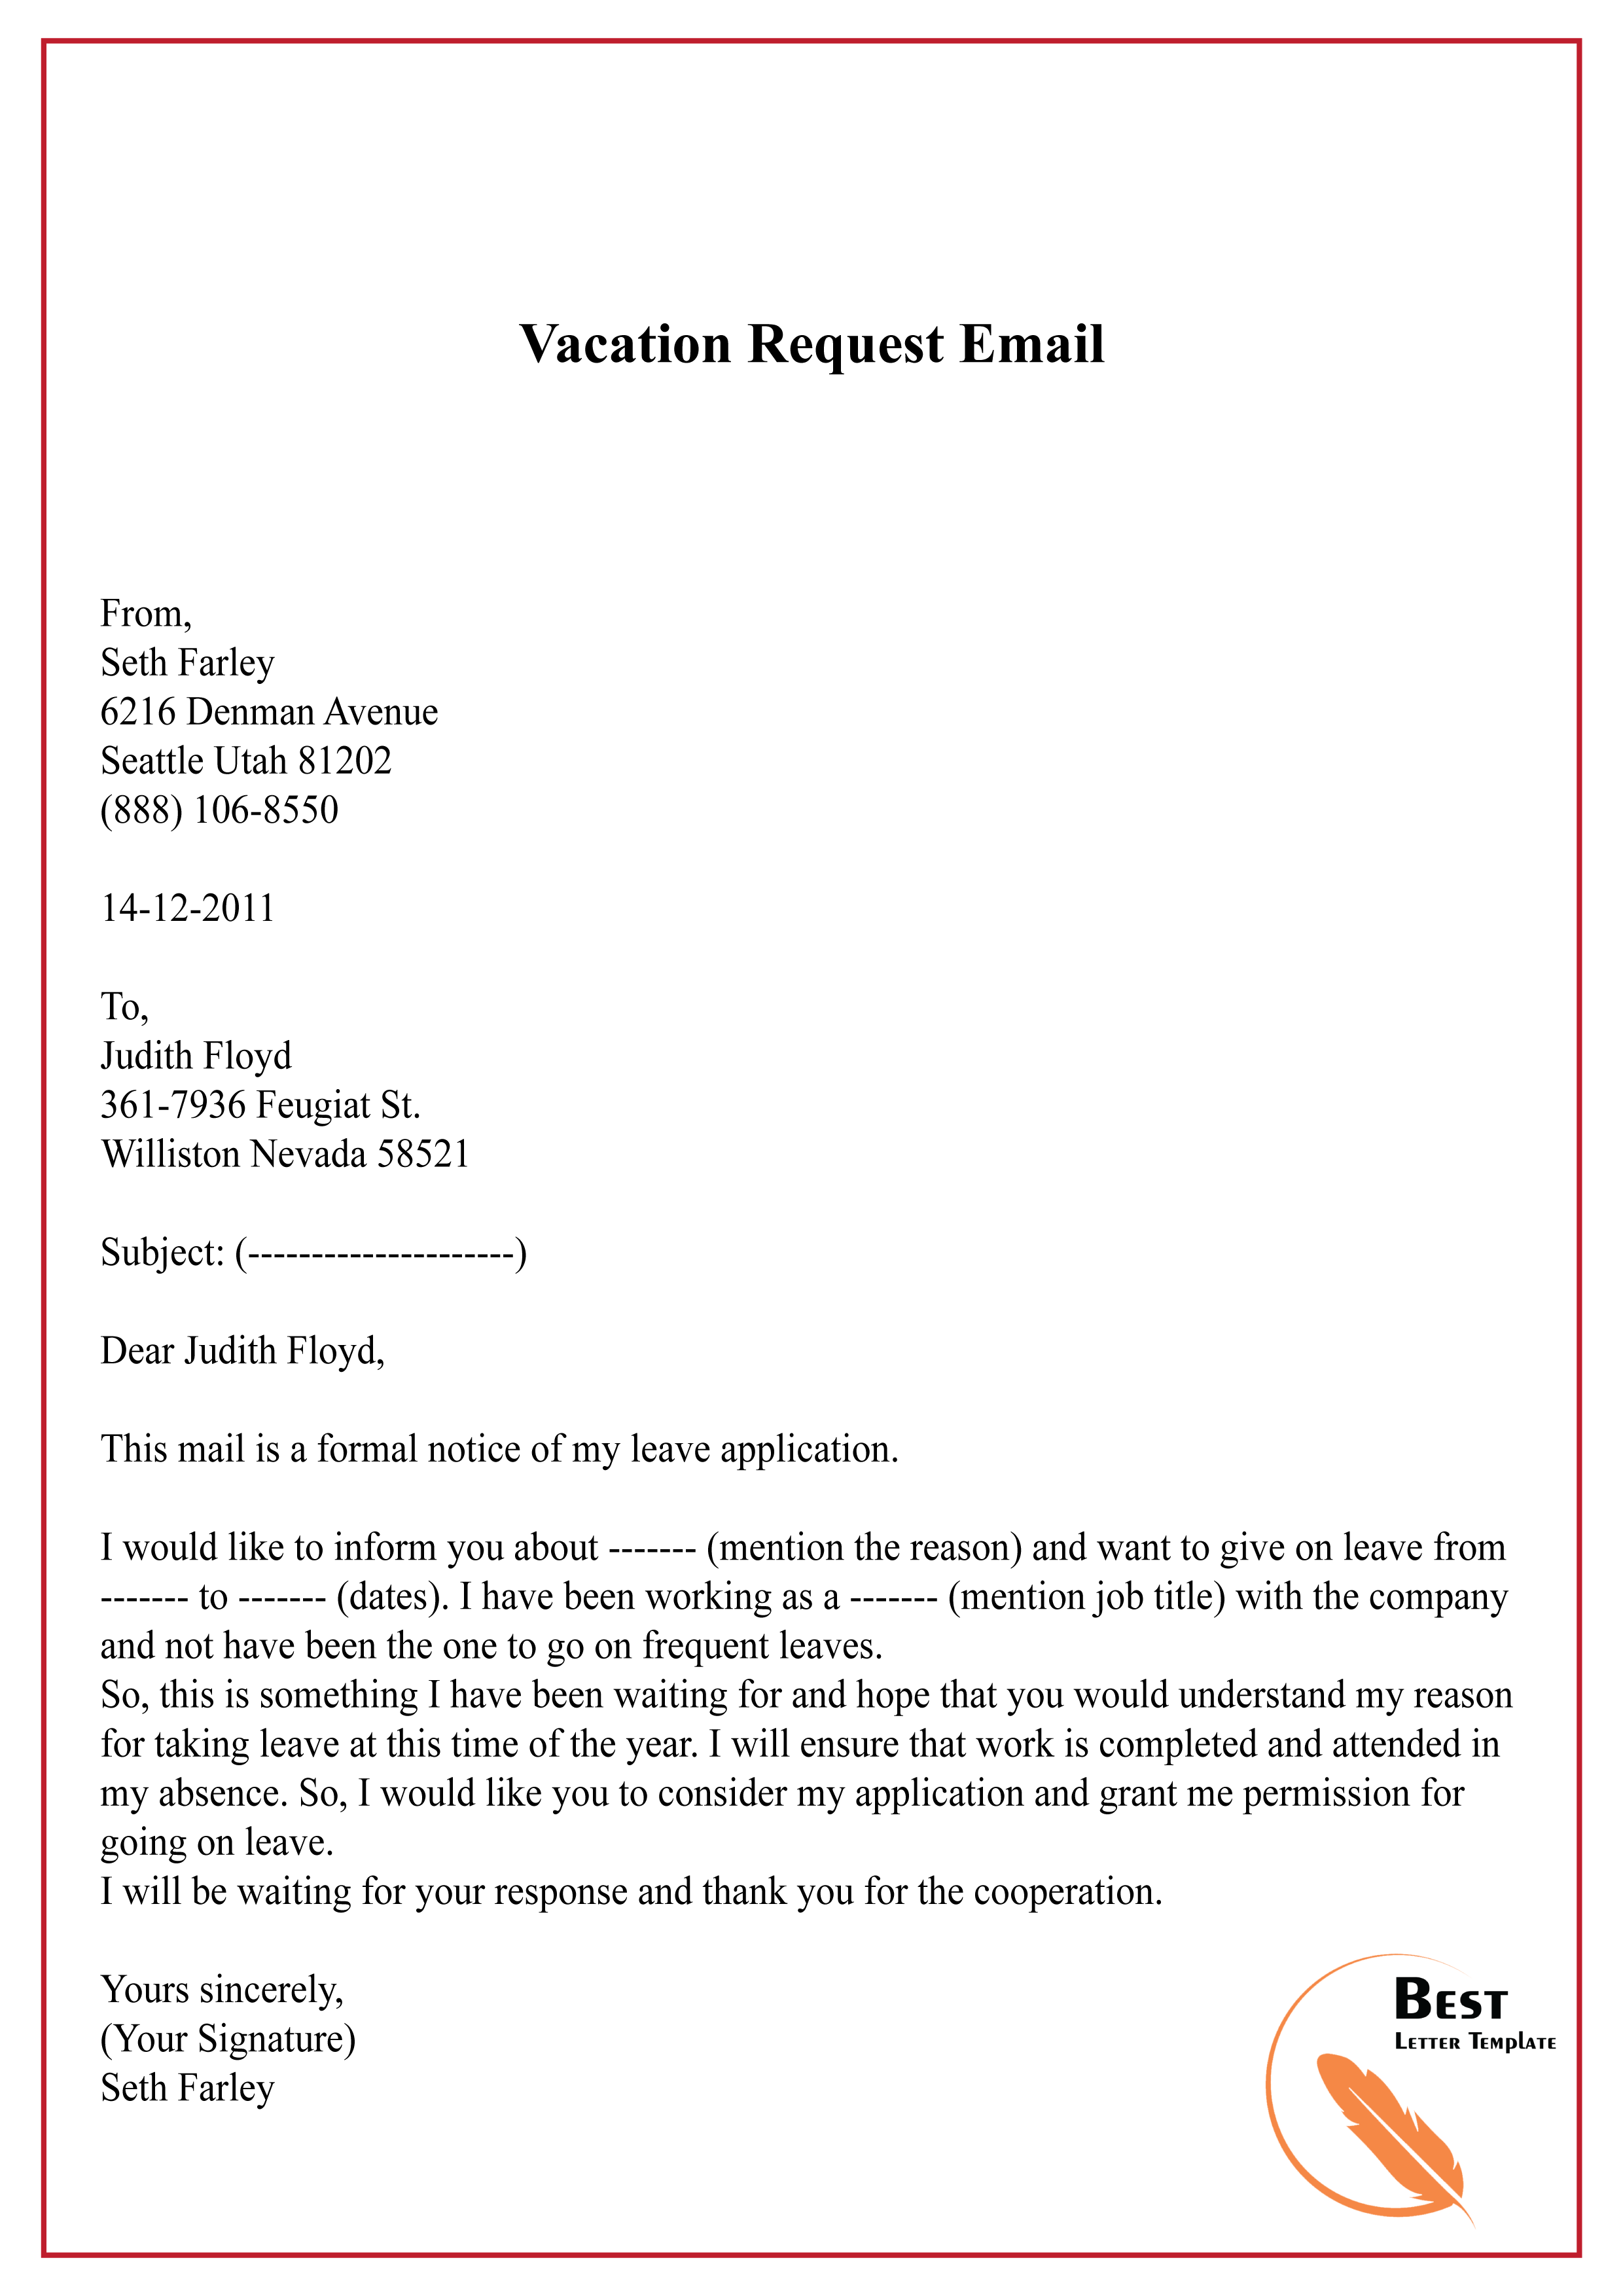 Request For Vacation Leave Sample Letter certify letter